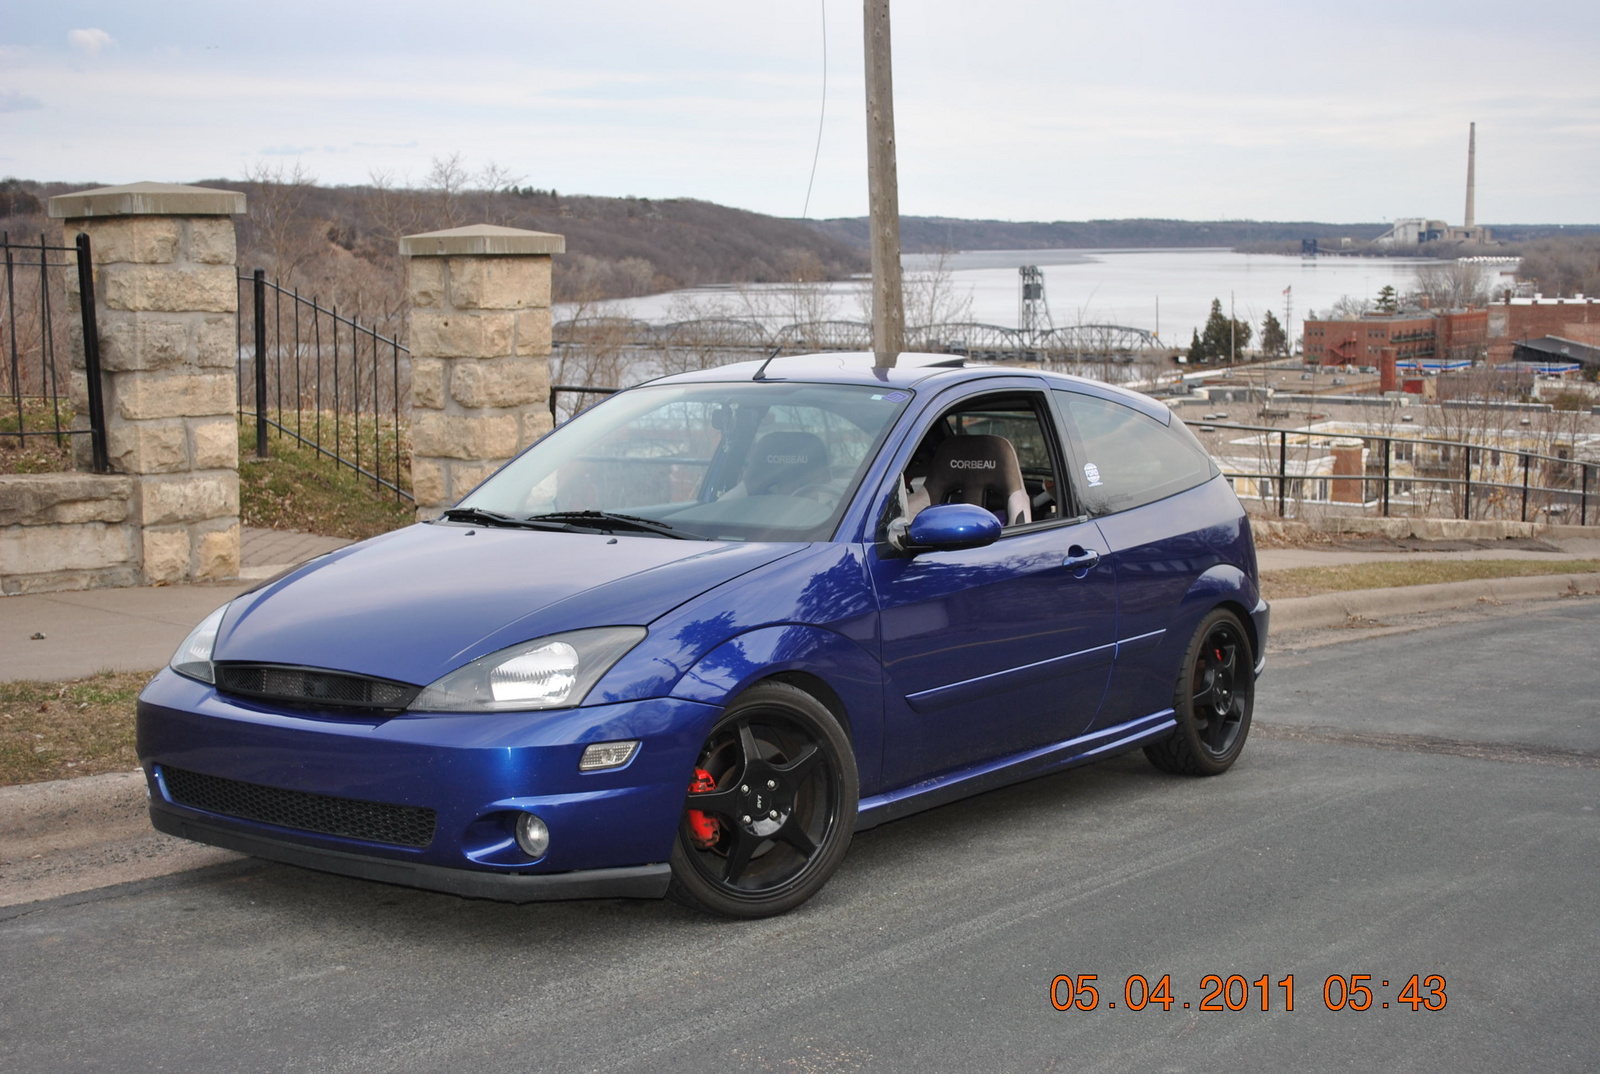 2002 Ford focus svt consumer review #2